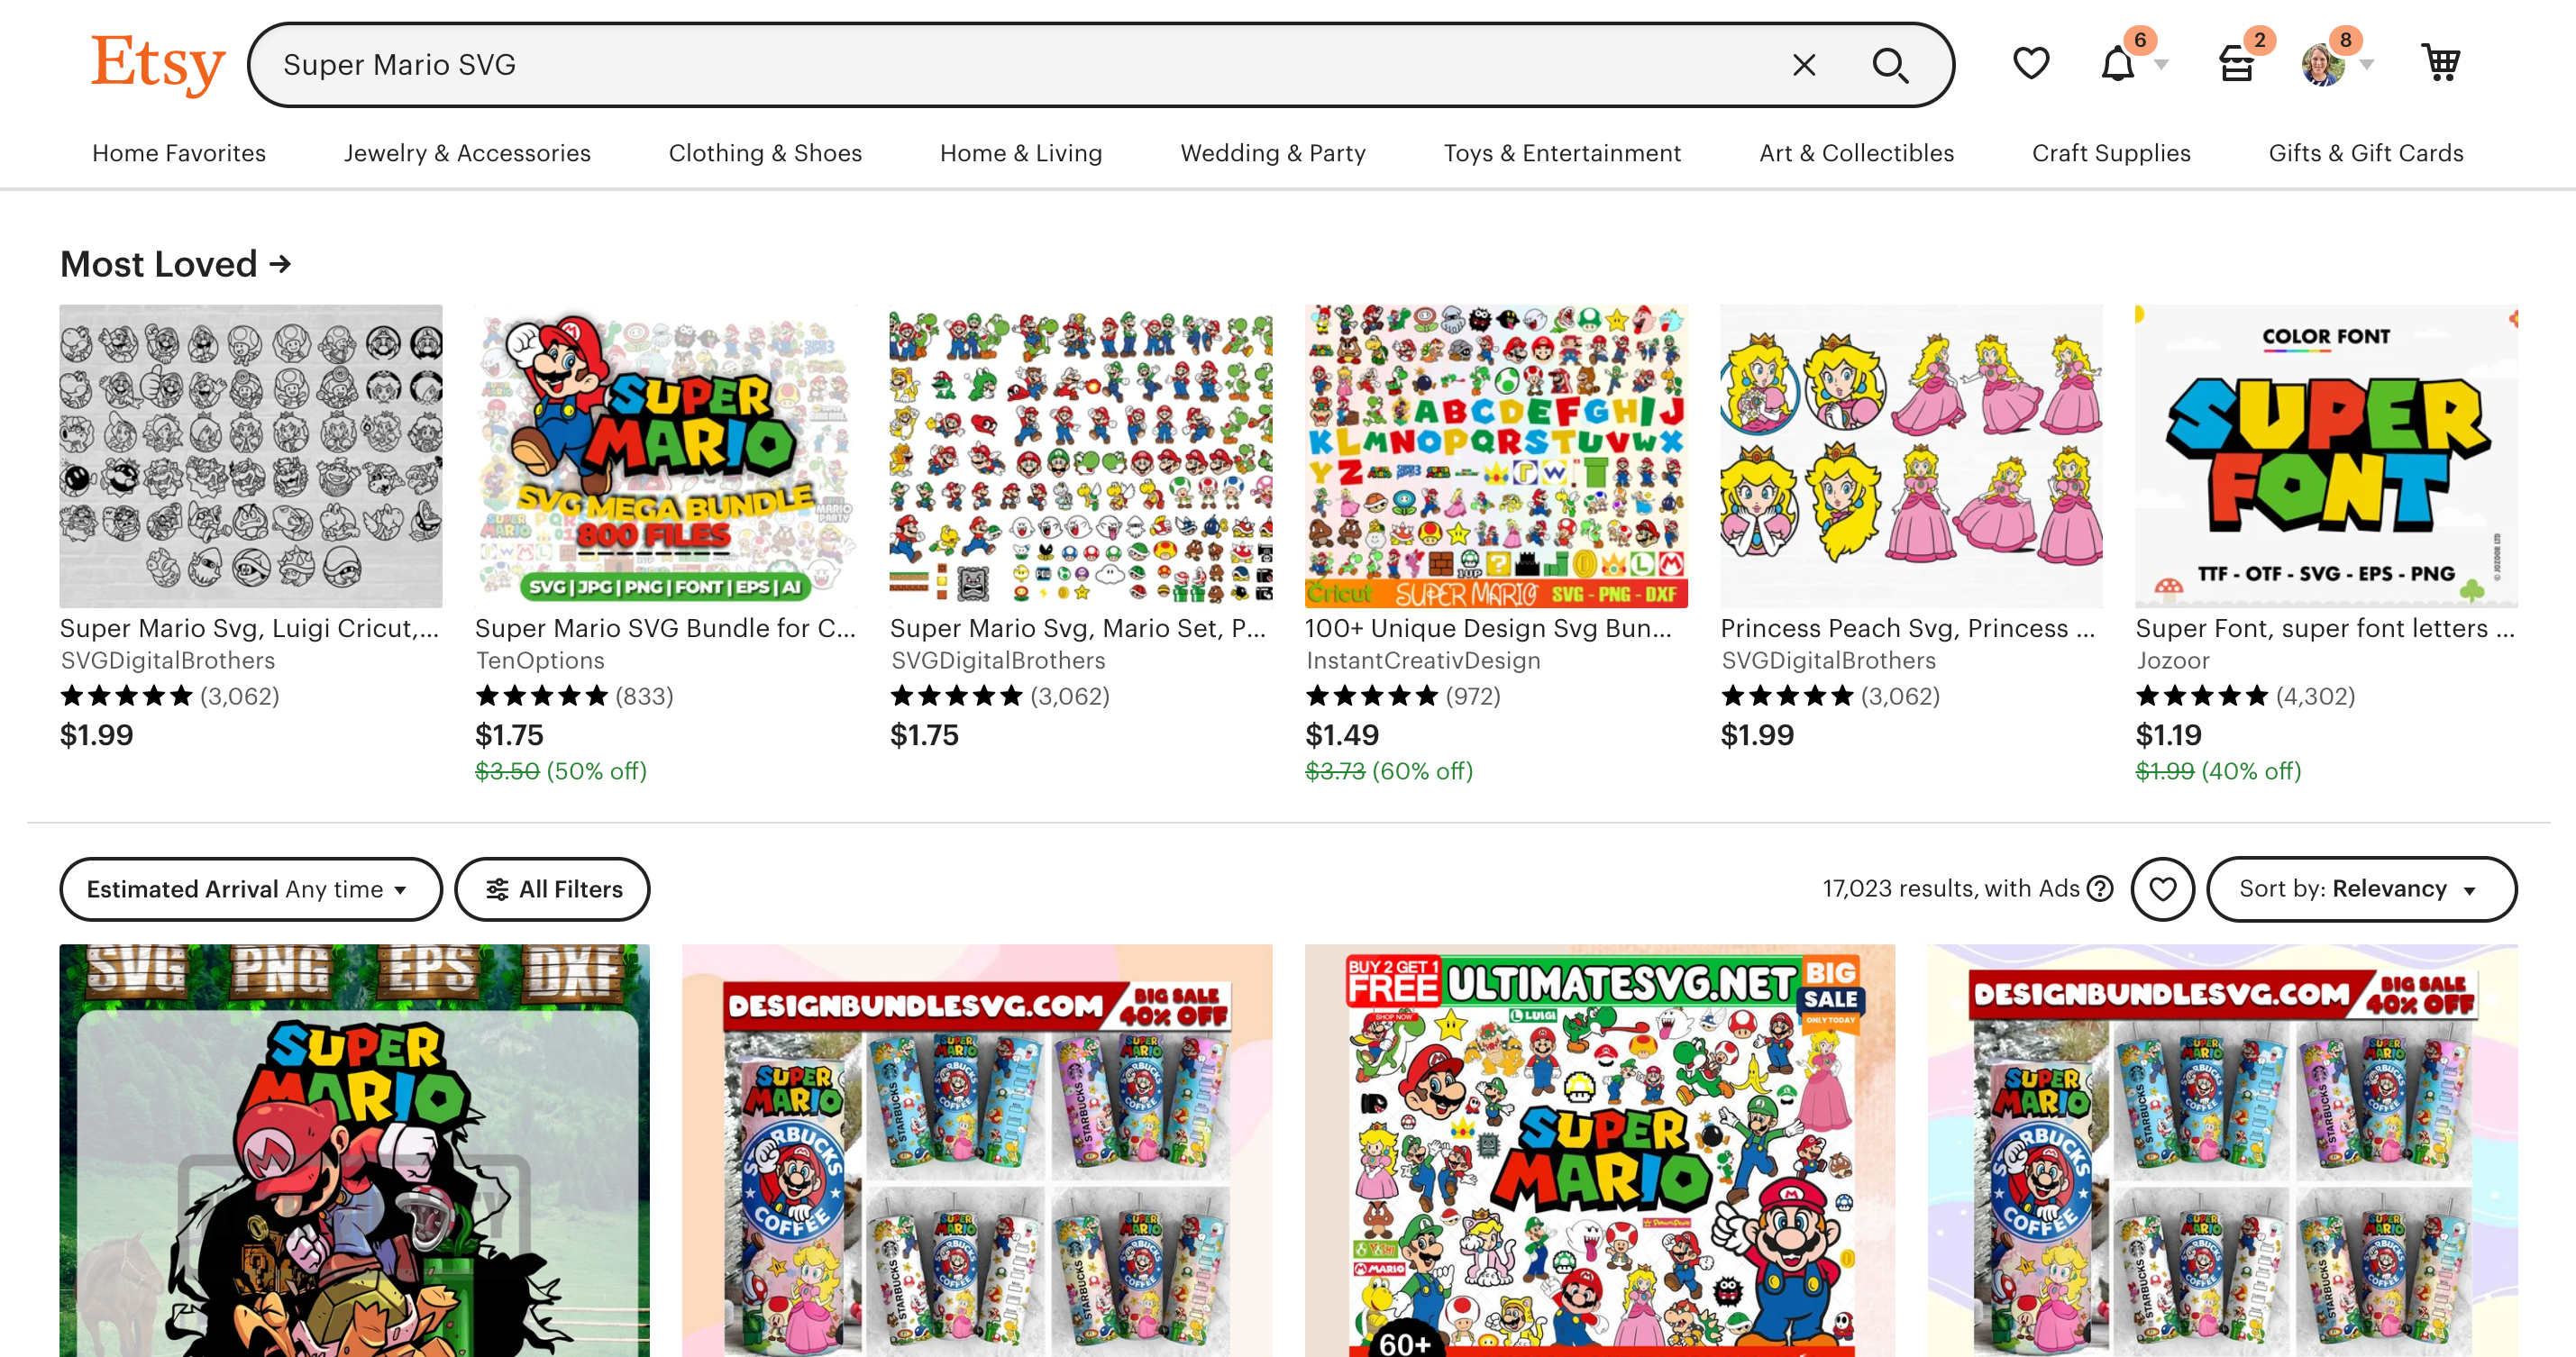 Screenshot of Etsy showing Super Mario SVGs for Sale - cuttingforbusiness.com.